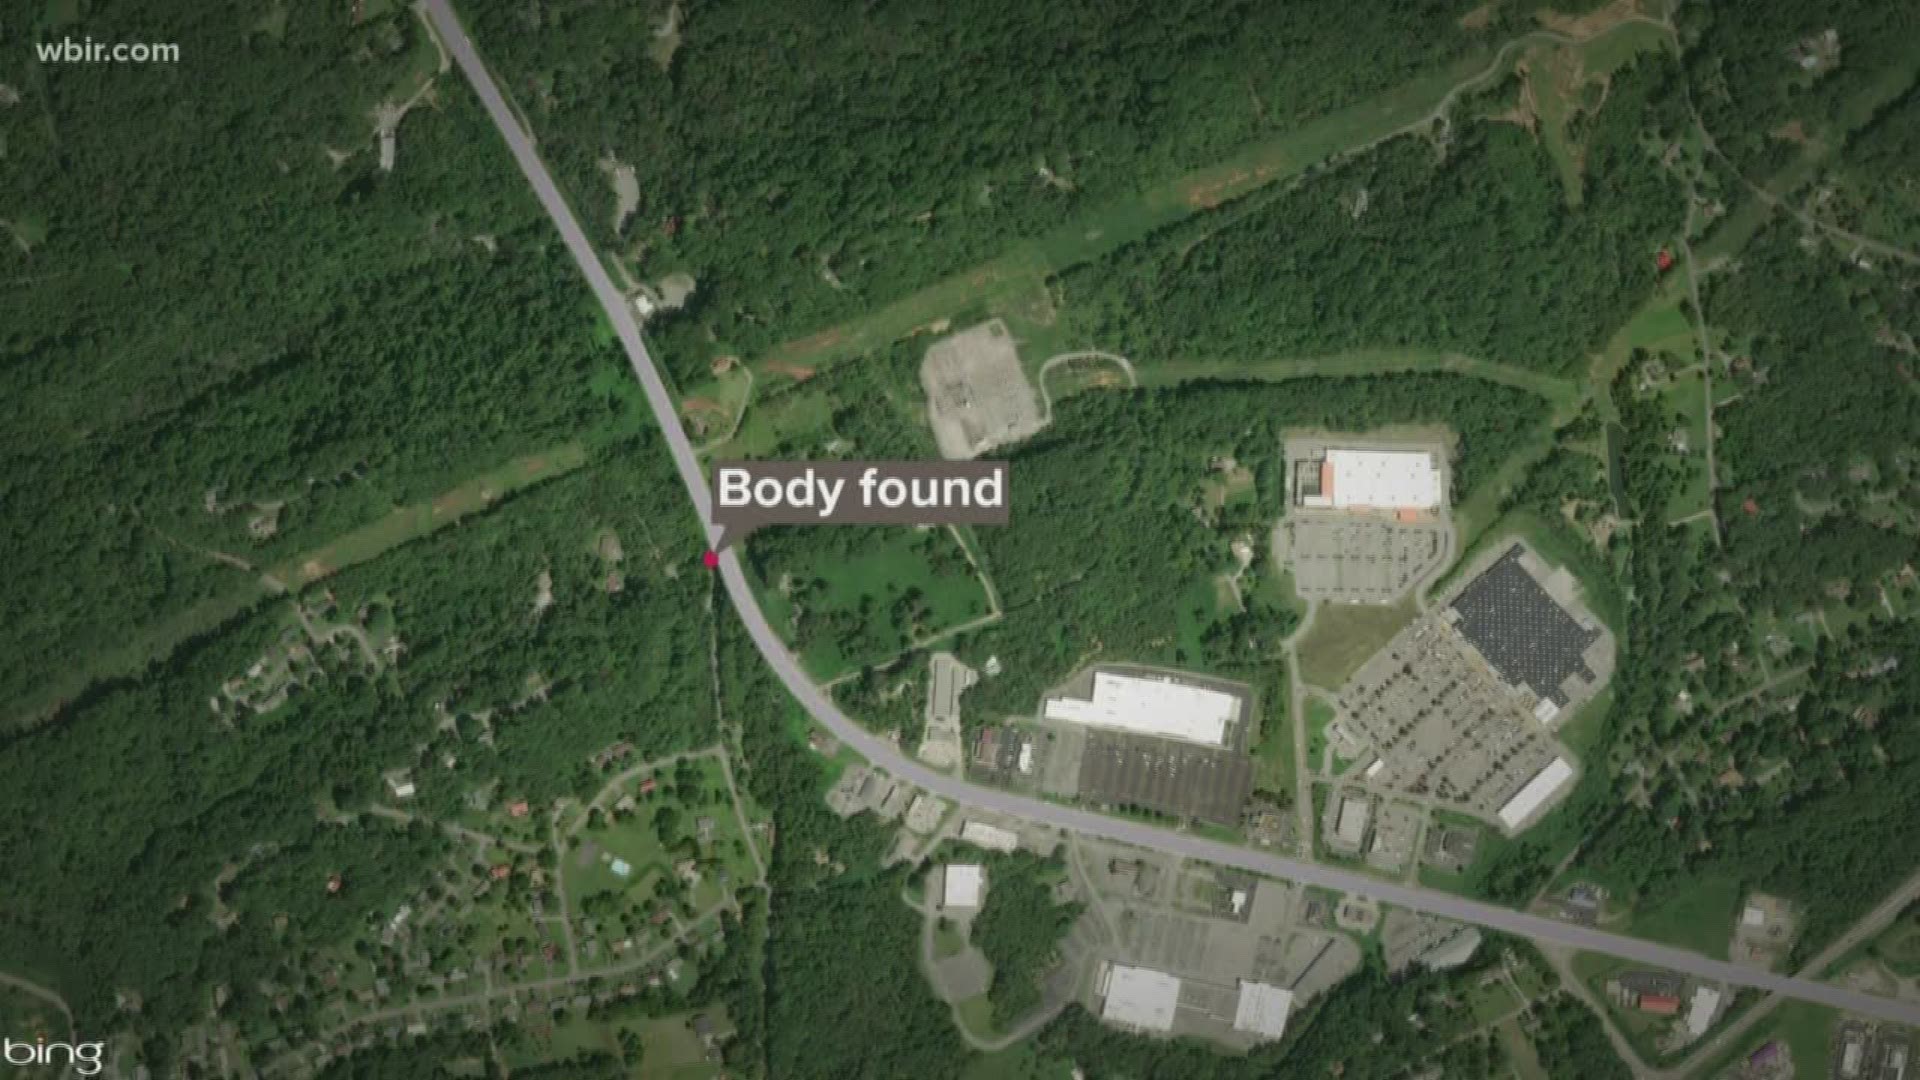 Police believe the man was killed in Knoxville before his body was moved to South Knox County.